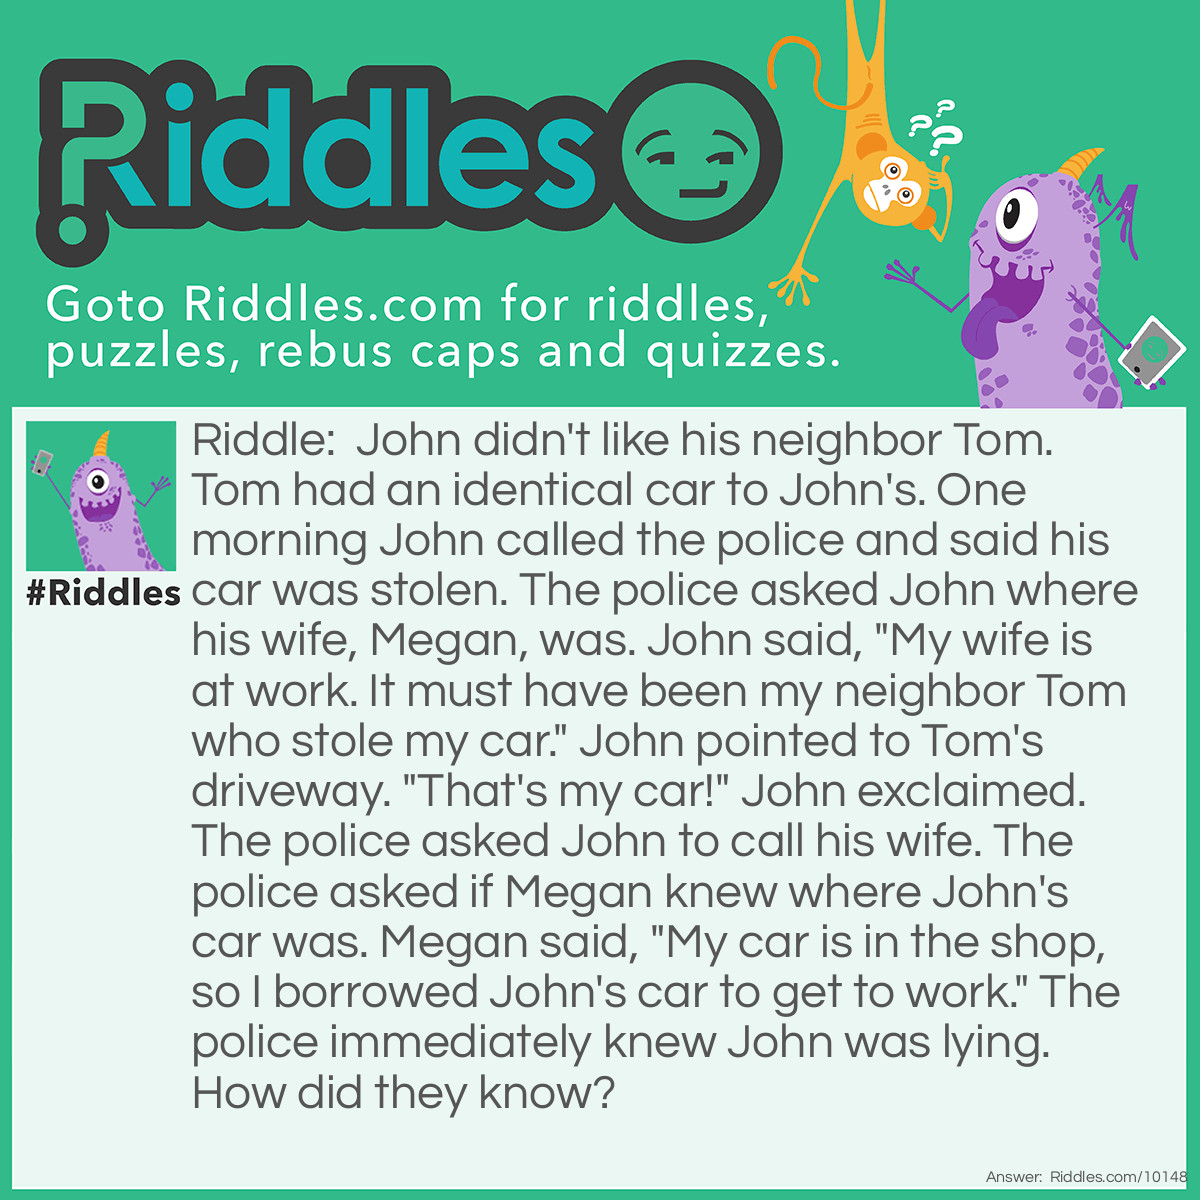 Riddle: John didn't like his neighbor Tom. Tom had an identical car to John's. One morning John called the police and said his car was stolen. The police asked John where his wife, Megan, was. John said, "My wife is at work. It must have been my neighbor Tom who stole my car." John pointed to Tom's driveway. "That's my car!" John exclaimed. The police asked John to call his wife. The police asked if Megan knew where John's car was. Megan said, "My car is in the shop, so I borrowed John's car to get to work." The police immediately knew John was lying. How did they know? Answer: If Megan drove John's car to work, how could Tom steal it?